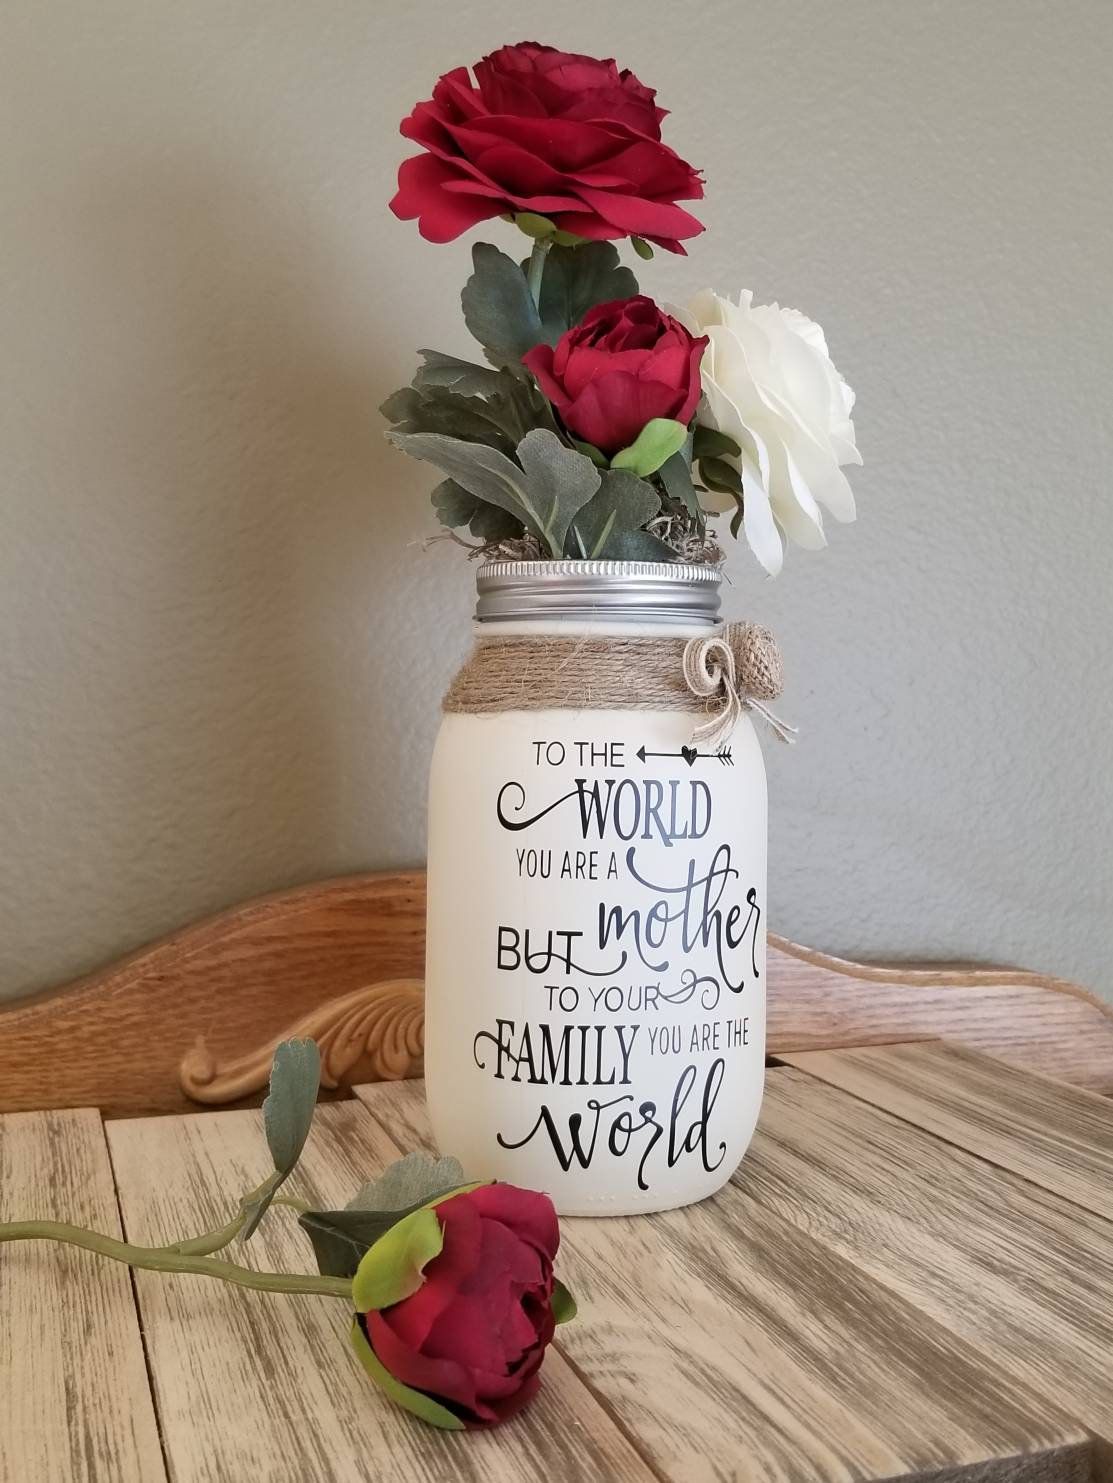 Mothers Day Flowers, Mothers Day Flower Arrangement, Mothers Day Gift Flowers, Mothers Quote, Floral Jar, Unique Gift for Mom - Mothers Day Flowers, Mothers Day Flower Arrangement, Mothers Day Gift Flowers, Mothers Quote, Floral Jar, Unique Gift for Mom -   15 beauty Day flowers ideas